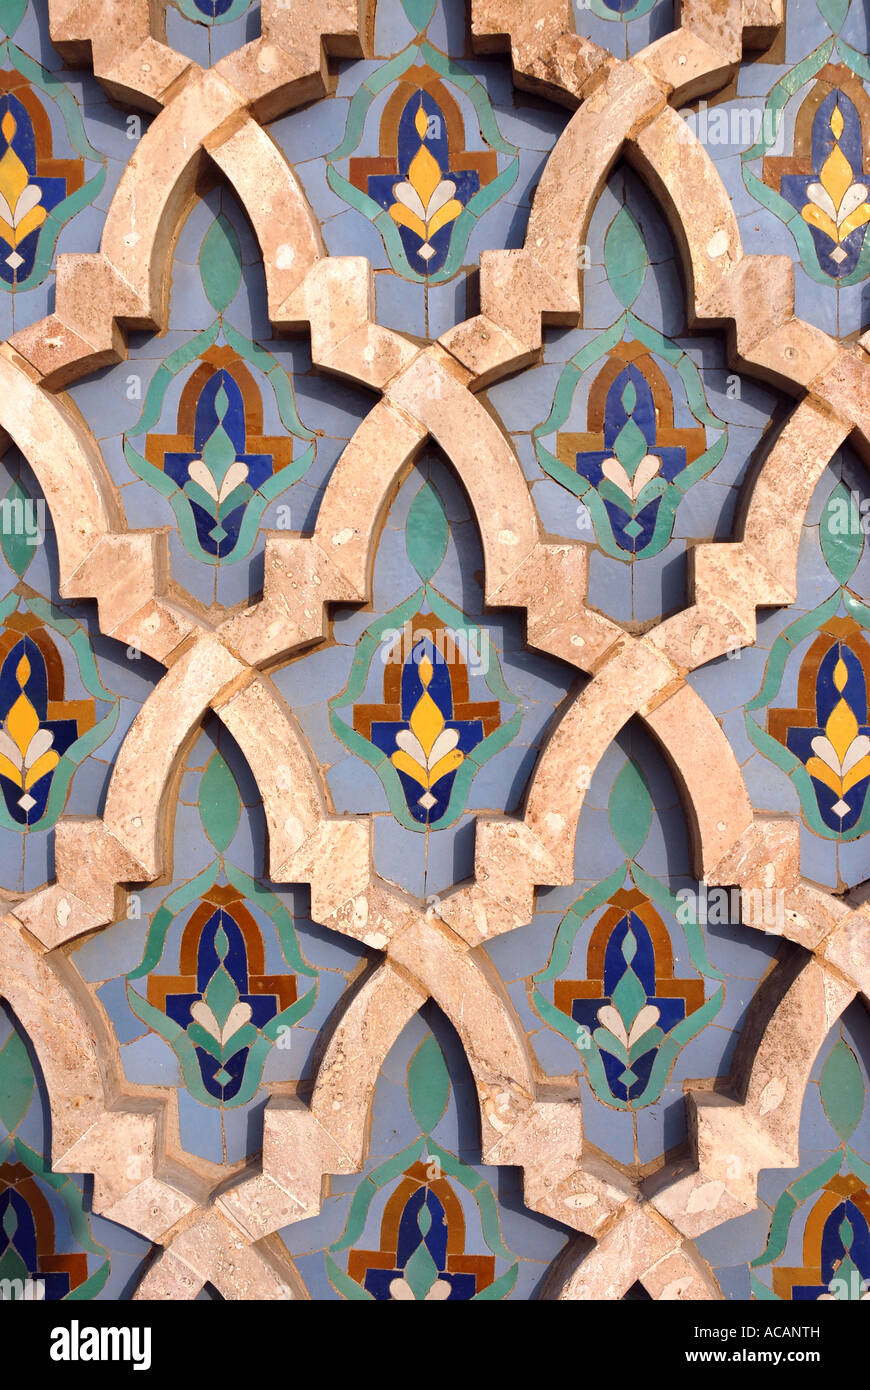 Ornaments on the frontage of Hassan II Mosque, Casablanca, Morocco, Africa Stock Photo